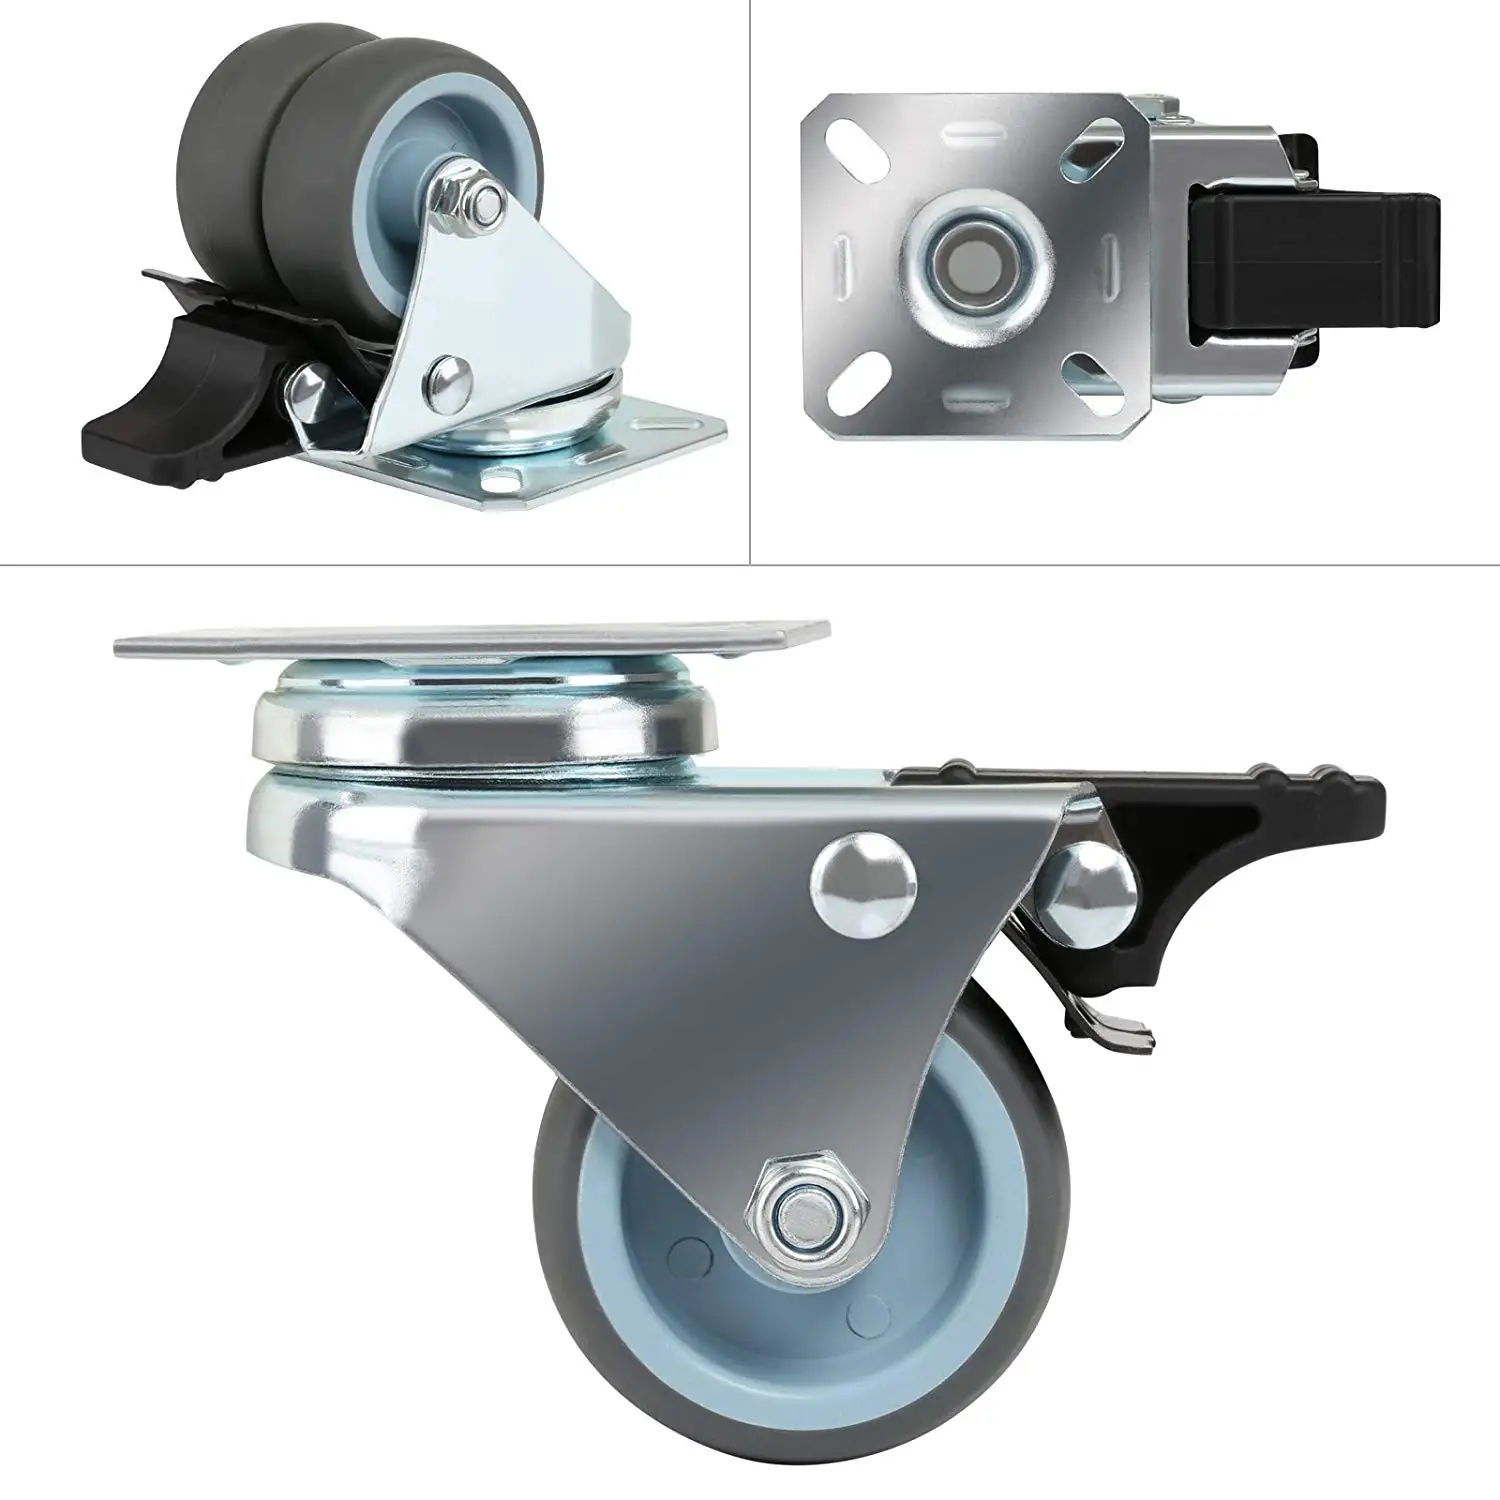 2 Swivel Castors without Brakes Castors for Furniture 40mm/50mm Heavy Duty Wheels for Furniture Furniture Moving Wheels for Pallet Furniture,Trolley,Desk,Cupboard 2 Casters Wheels with Brakes